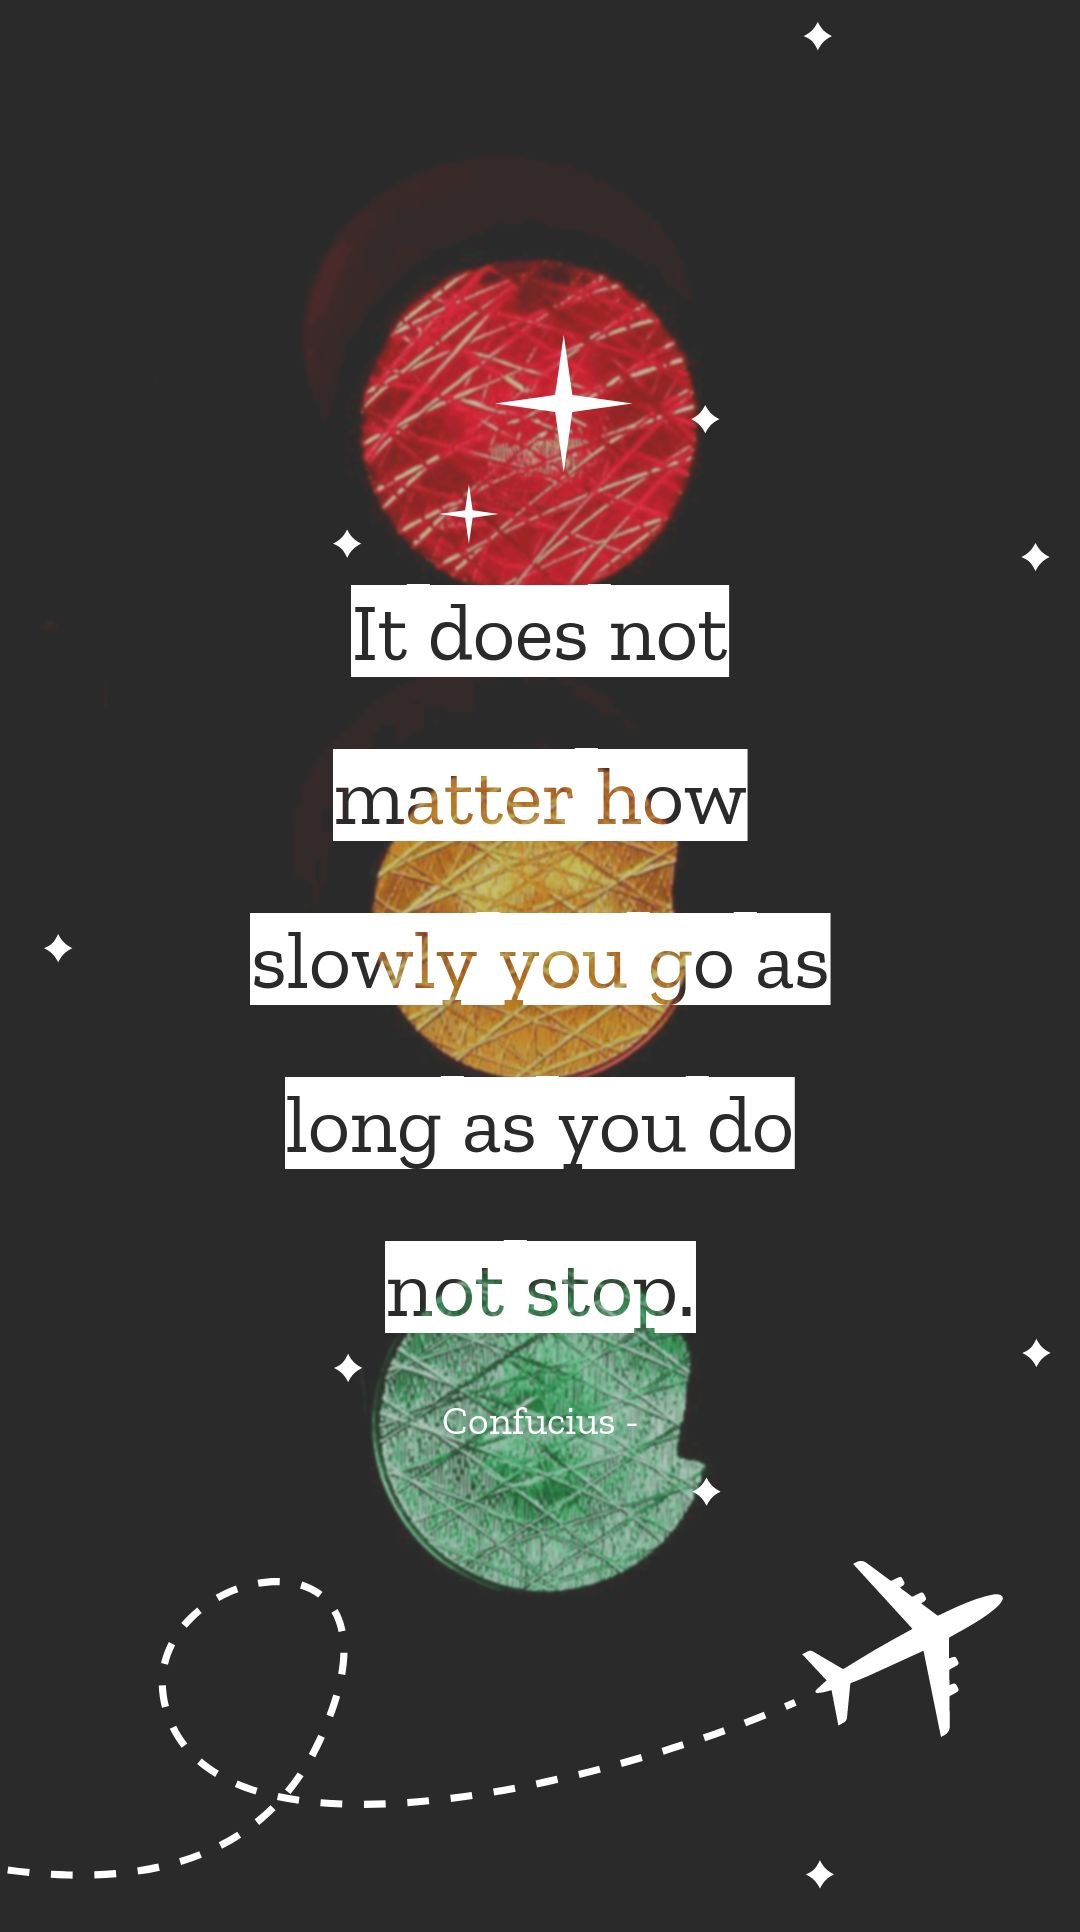 Confucius - It does not matter how slowly you go as long as you do not stop.